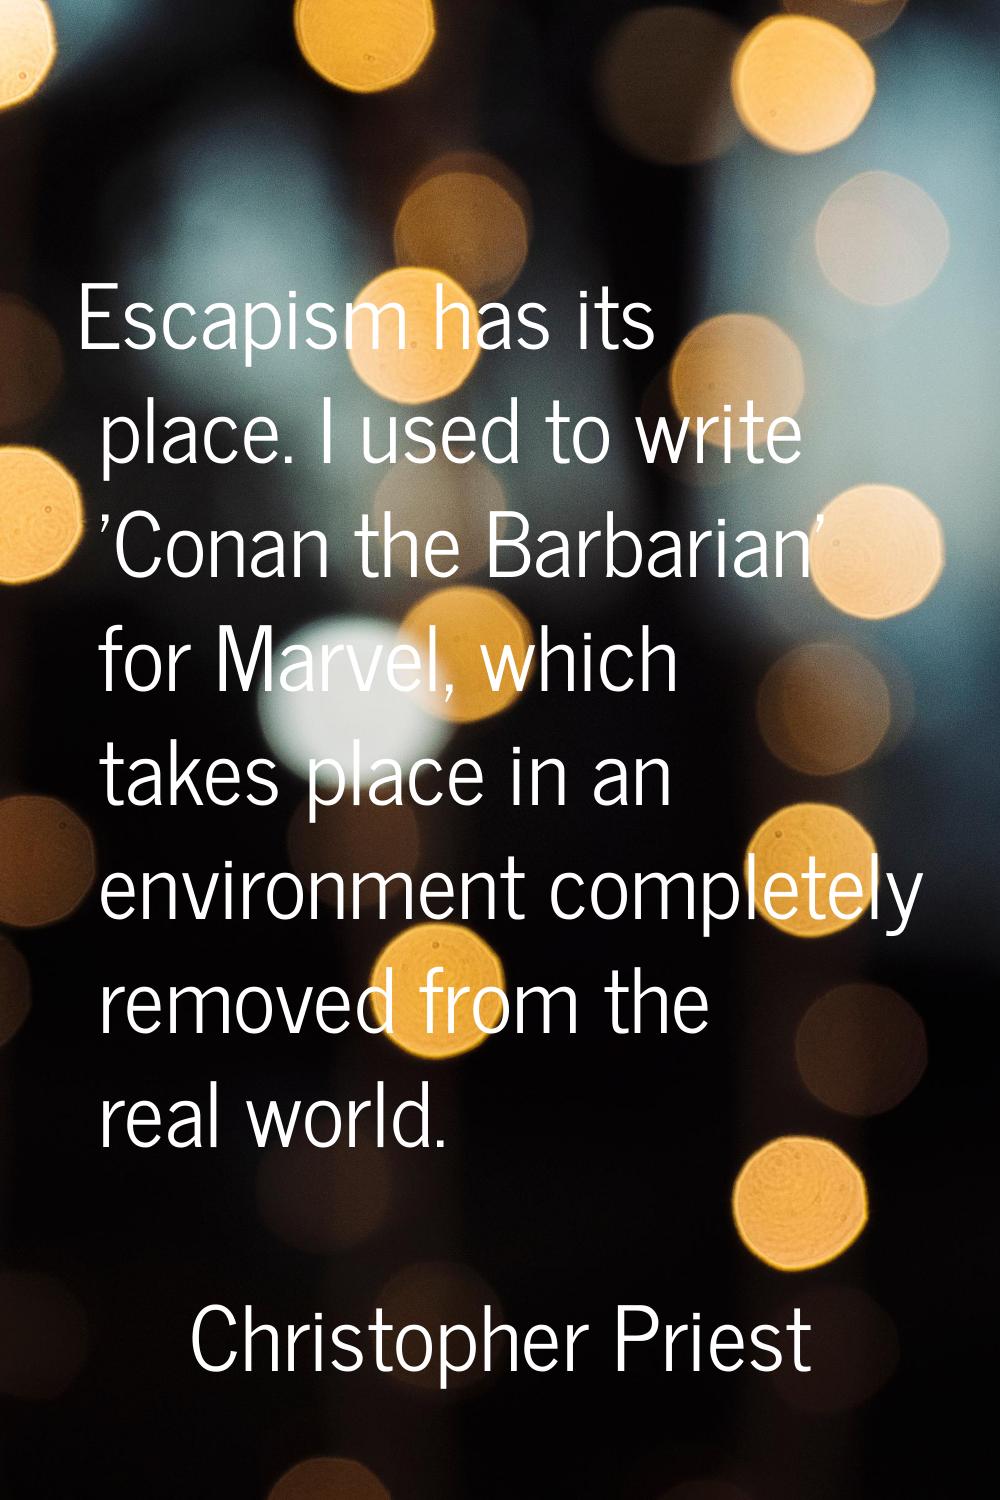 Escapism has its place. I used to write 'Conan the Barbarian' for Marvel, which takes place in an e